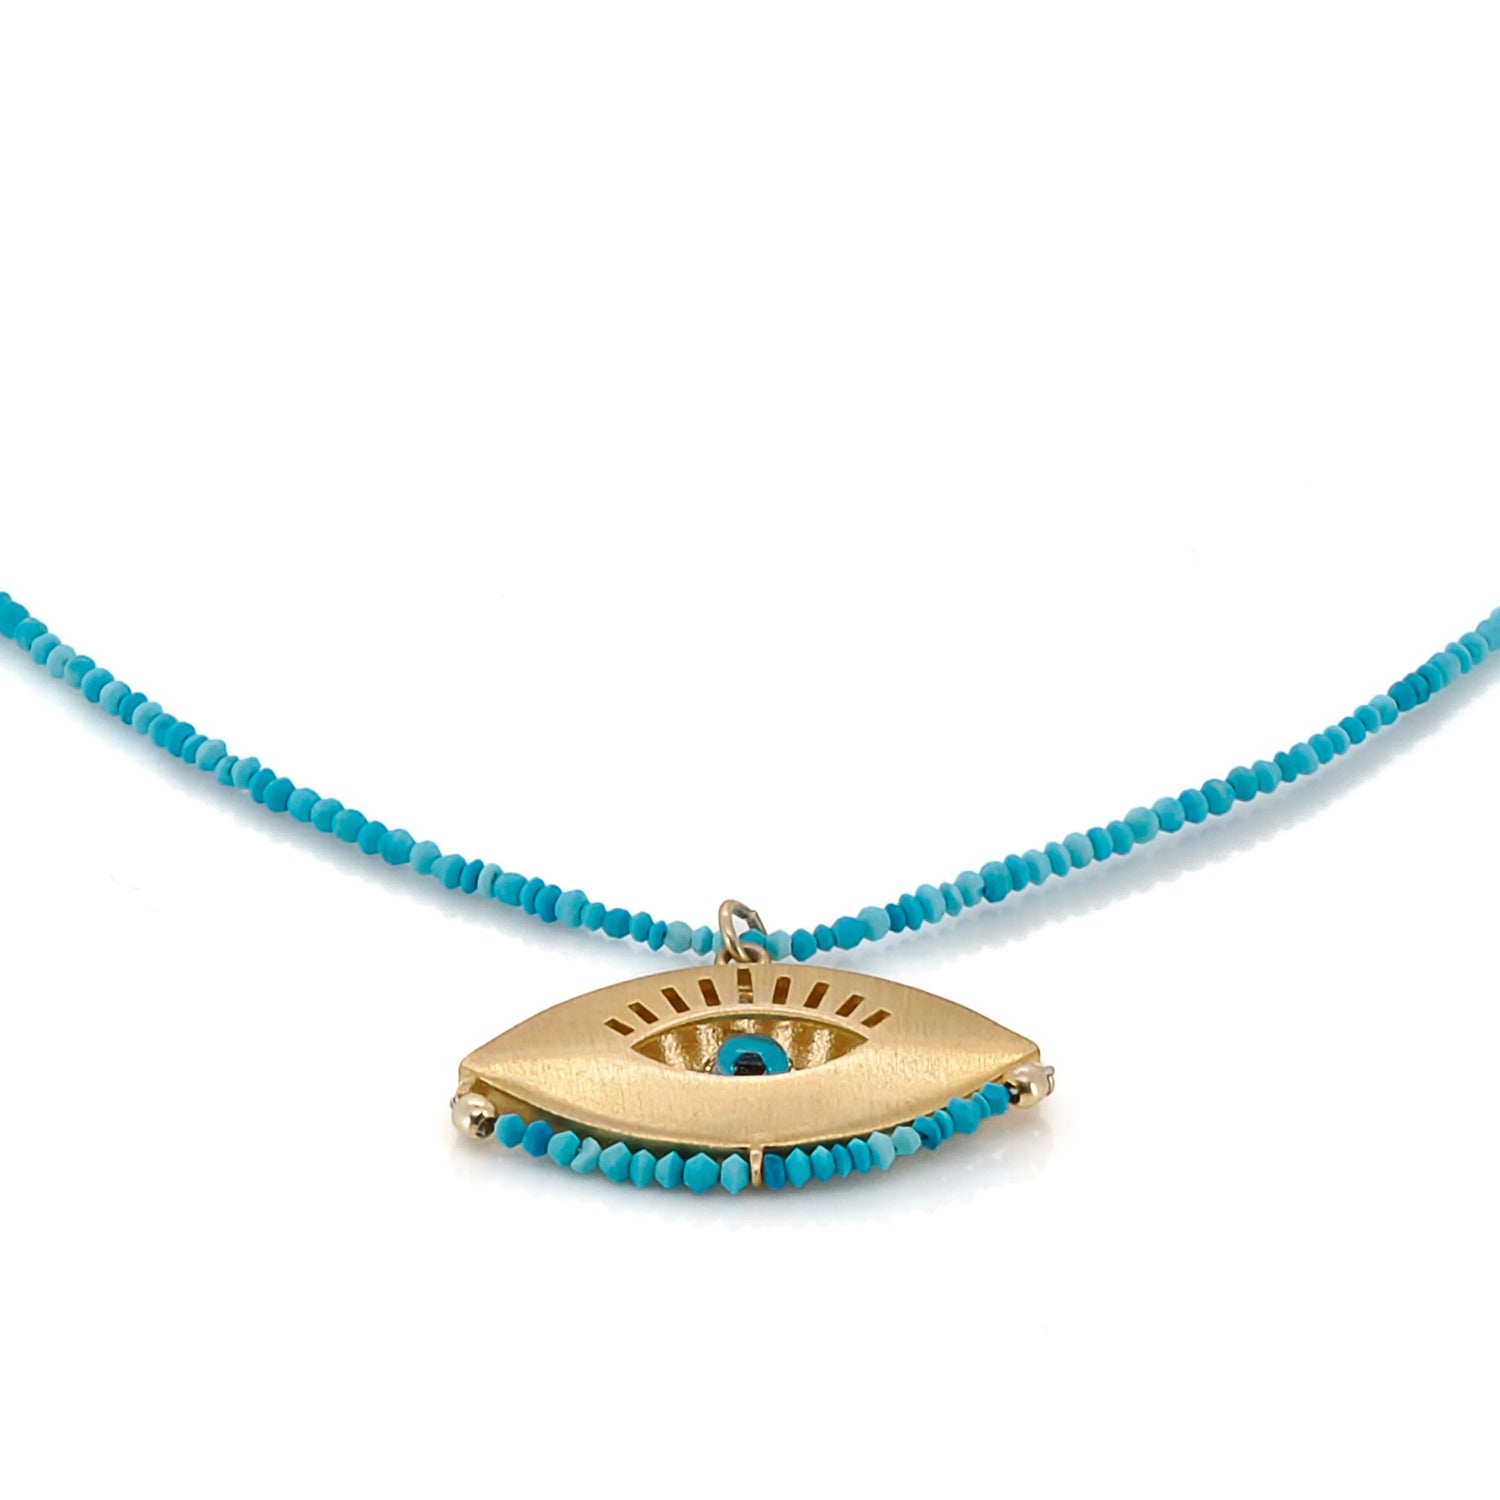 Handcrafted Turquoise Stone Beads Necklace.